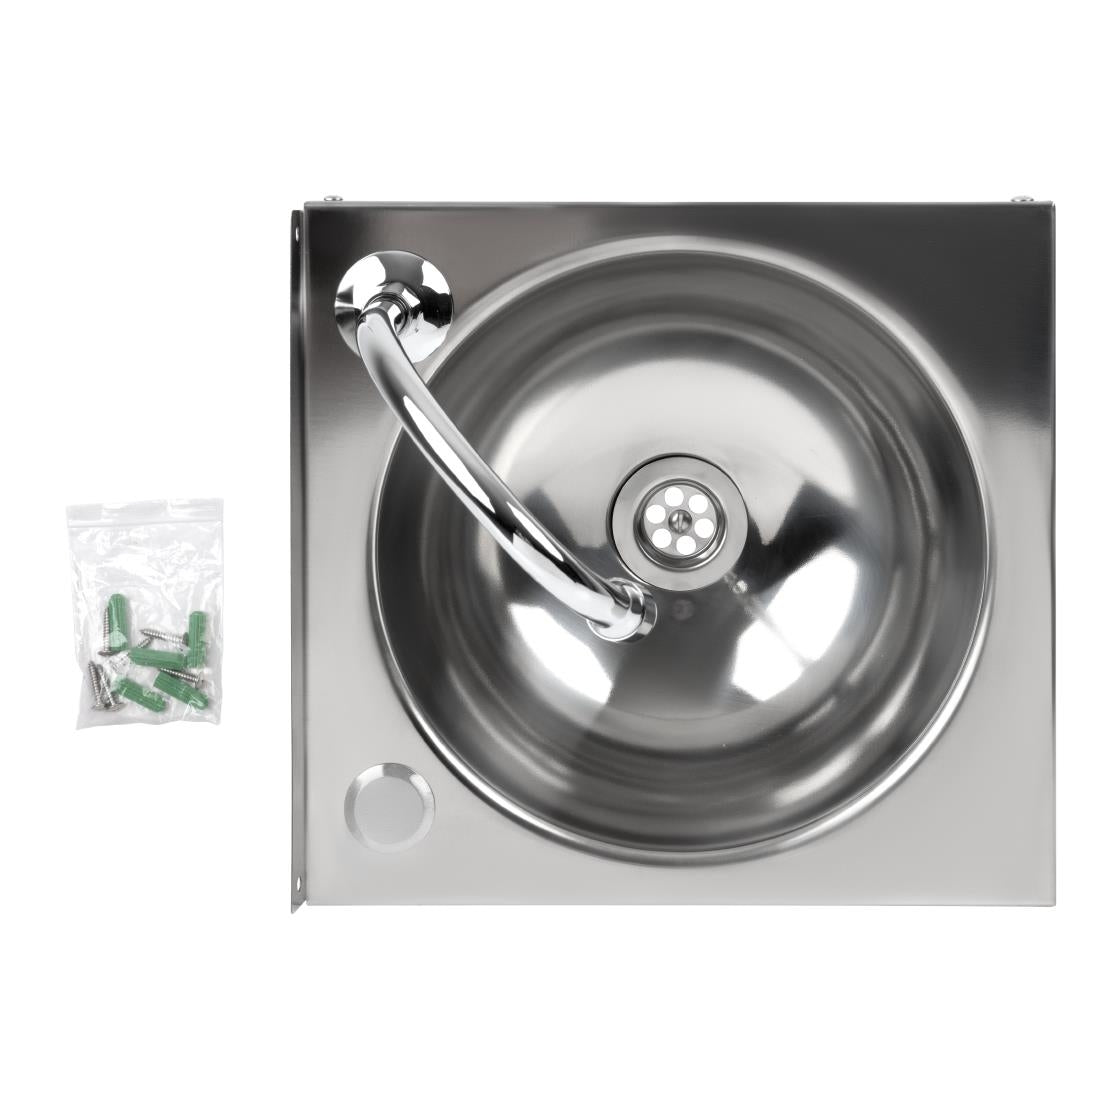 Basix Stainless Steel Knee Operated Hand Wash Basin JD Catering Equipment Solutions Ltd